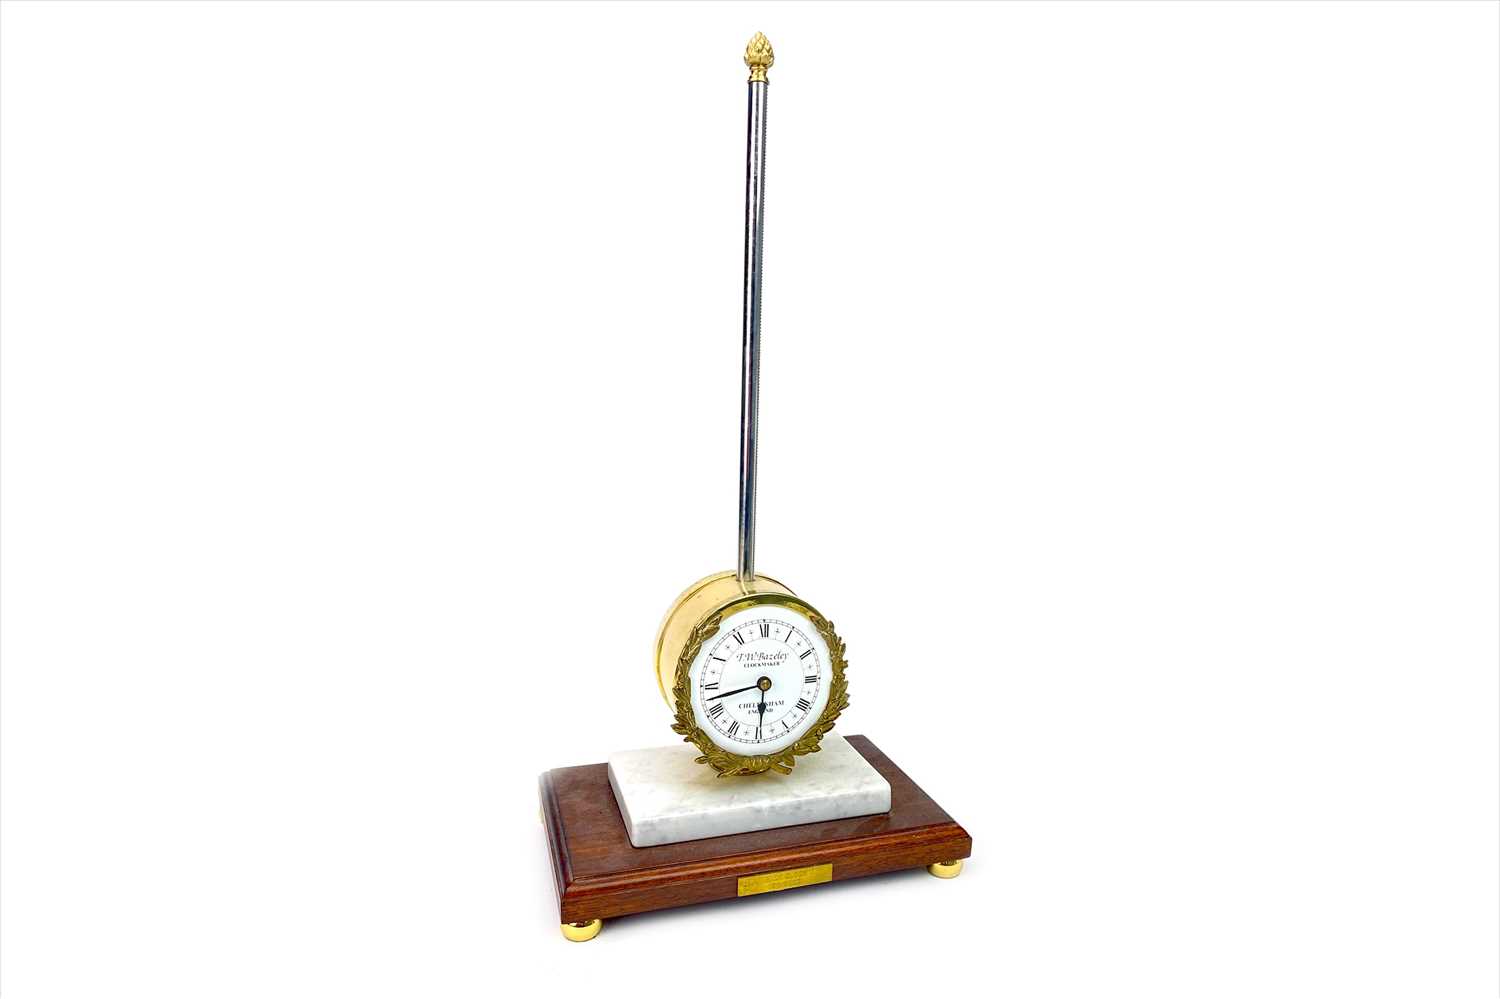 Lot 1123 - A REPRODUCTION RACK CLOCK BY T.W. BAZELEY